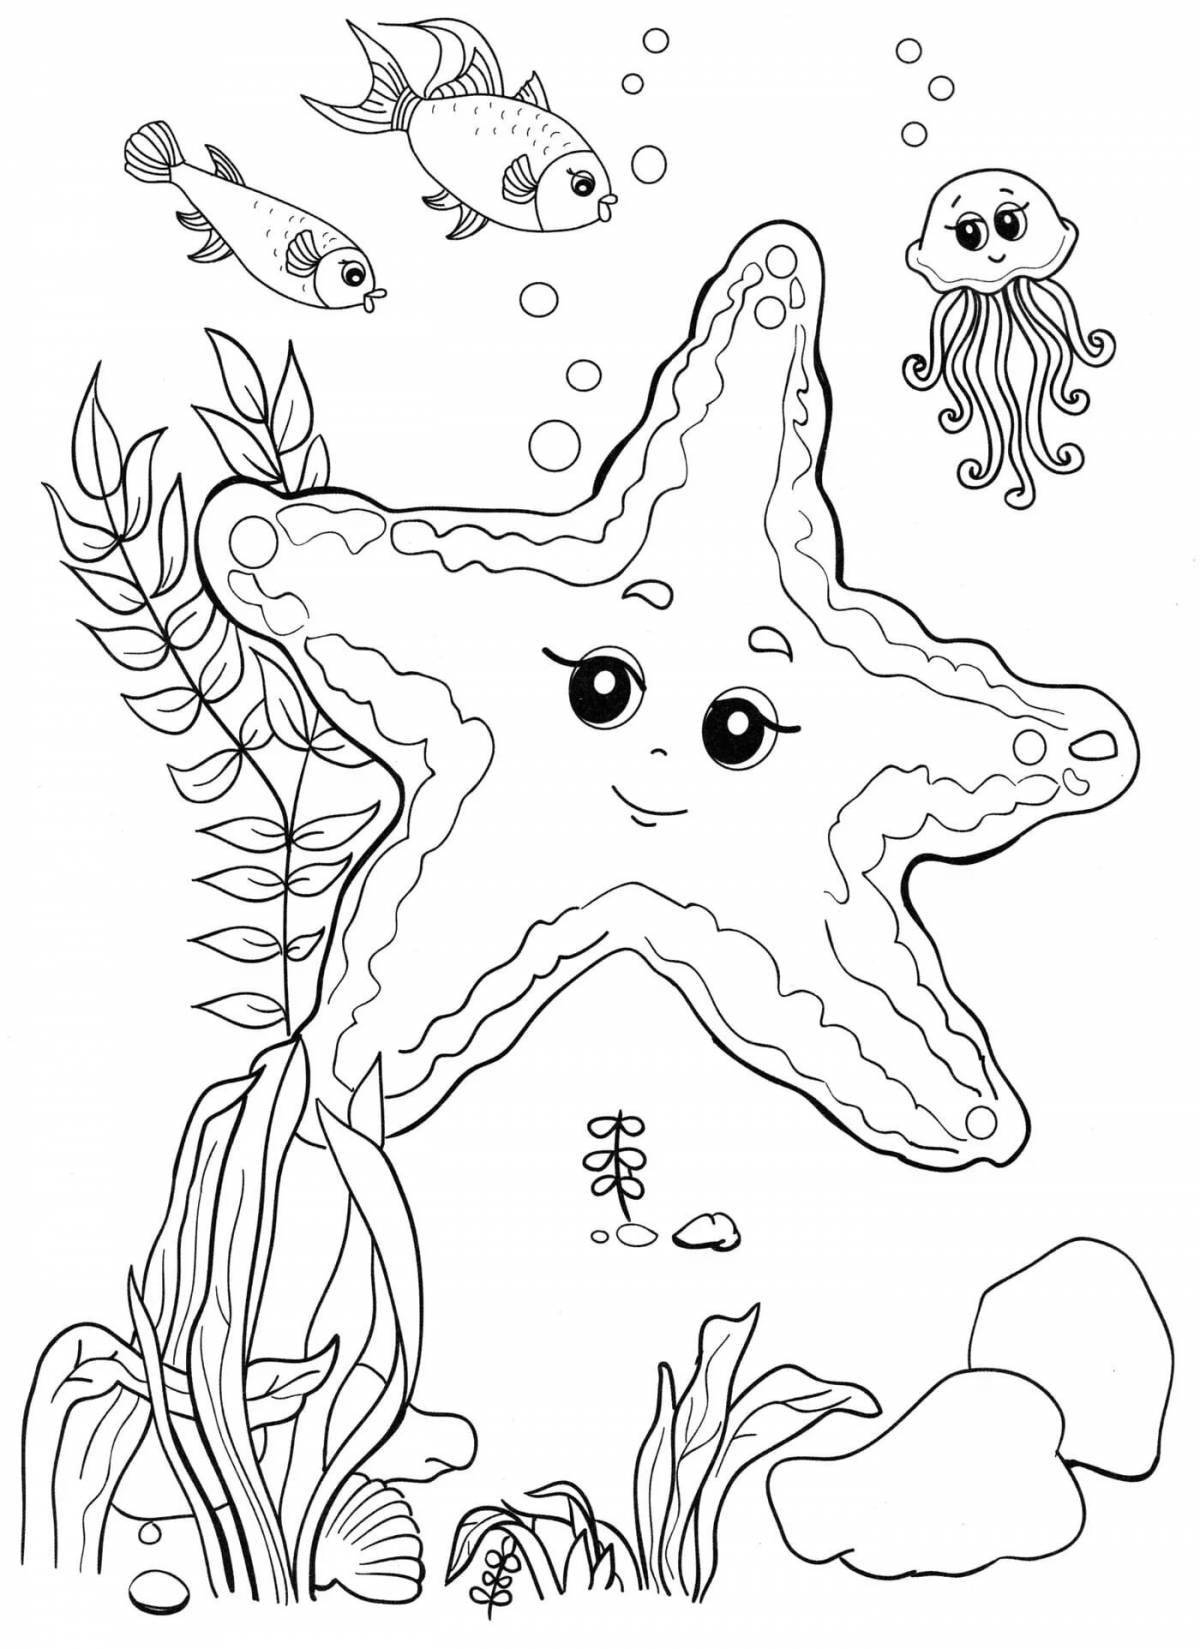 Attractive marine life coloring pages